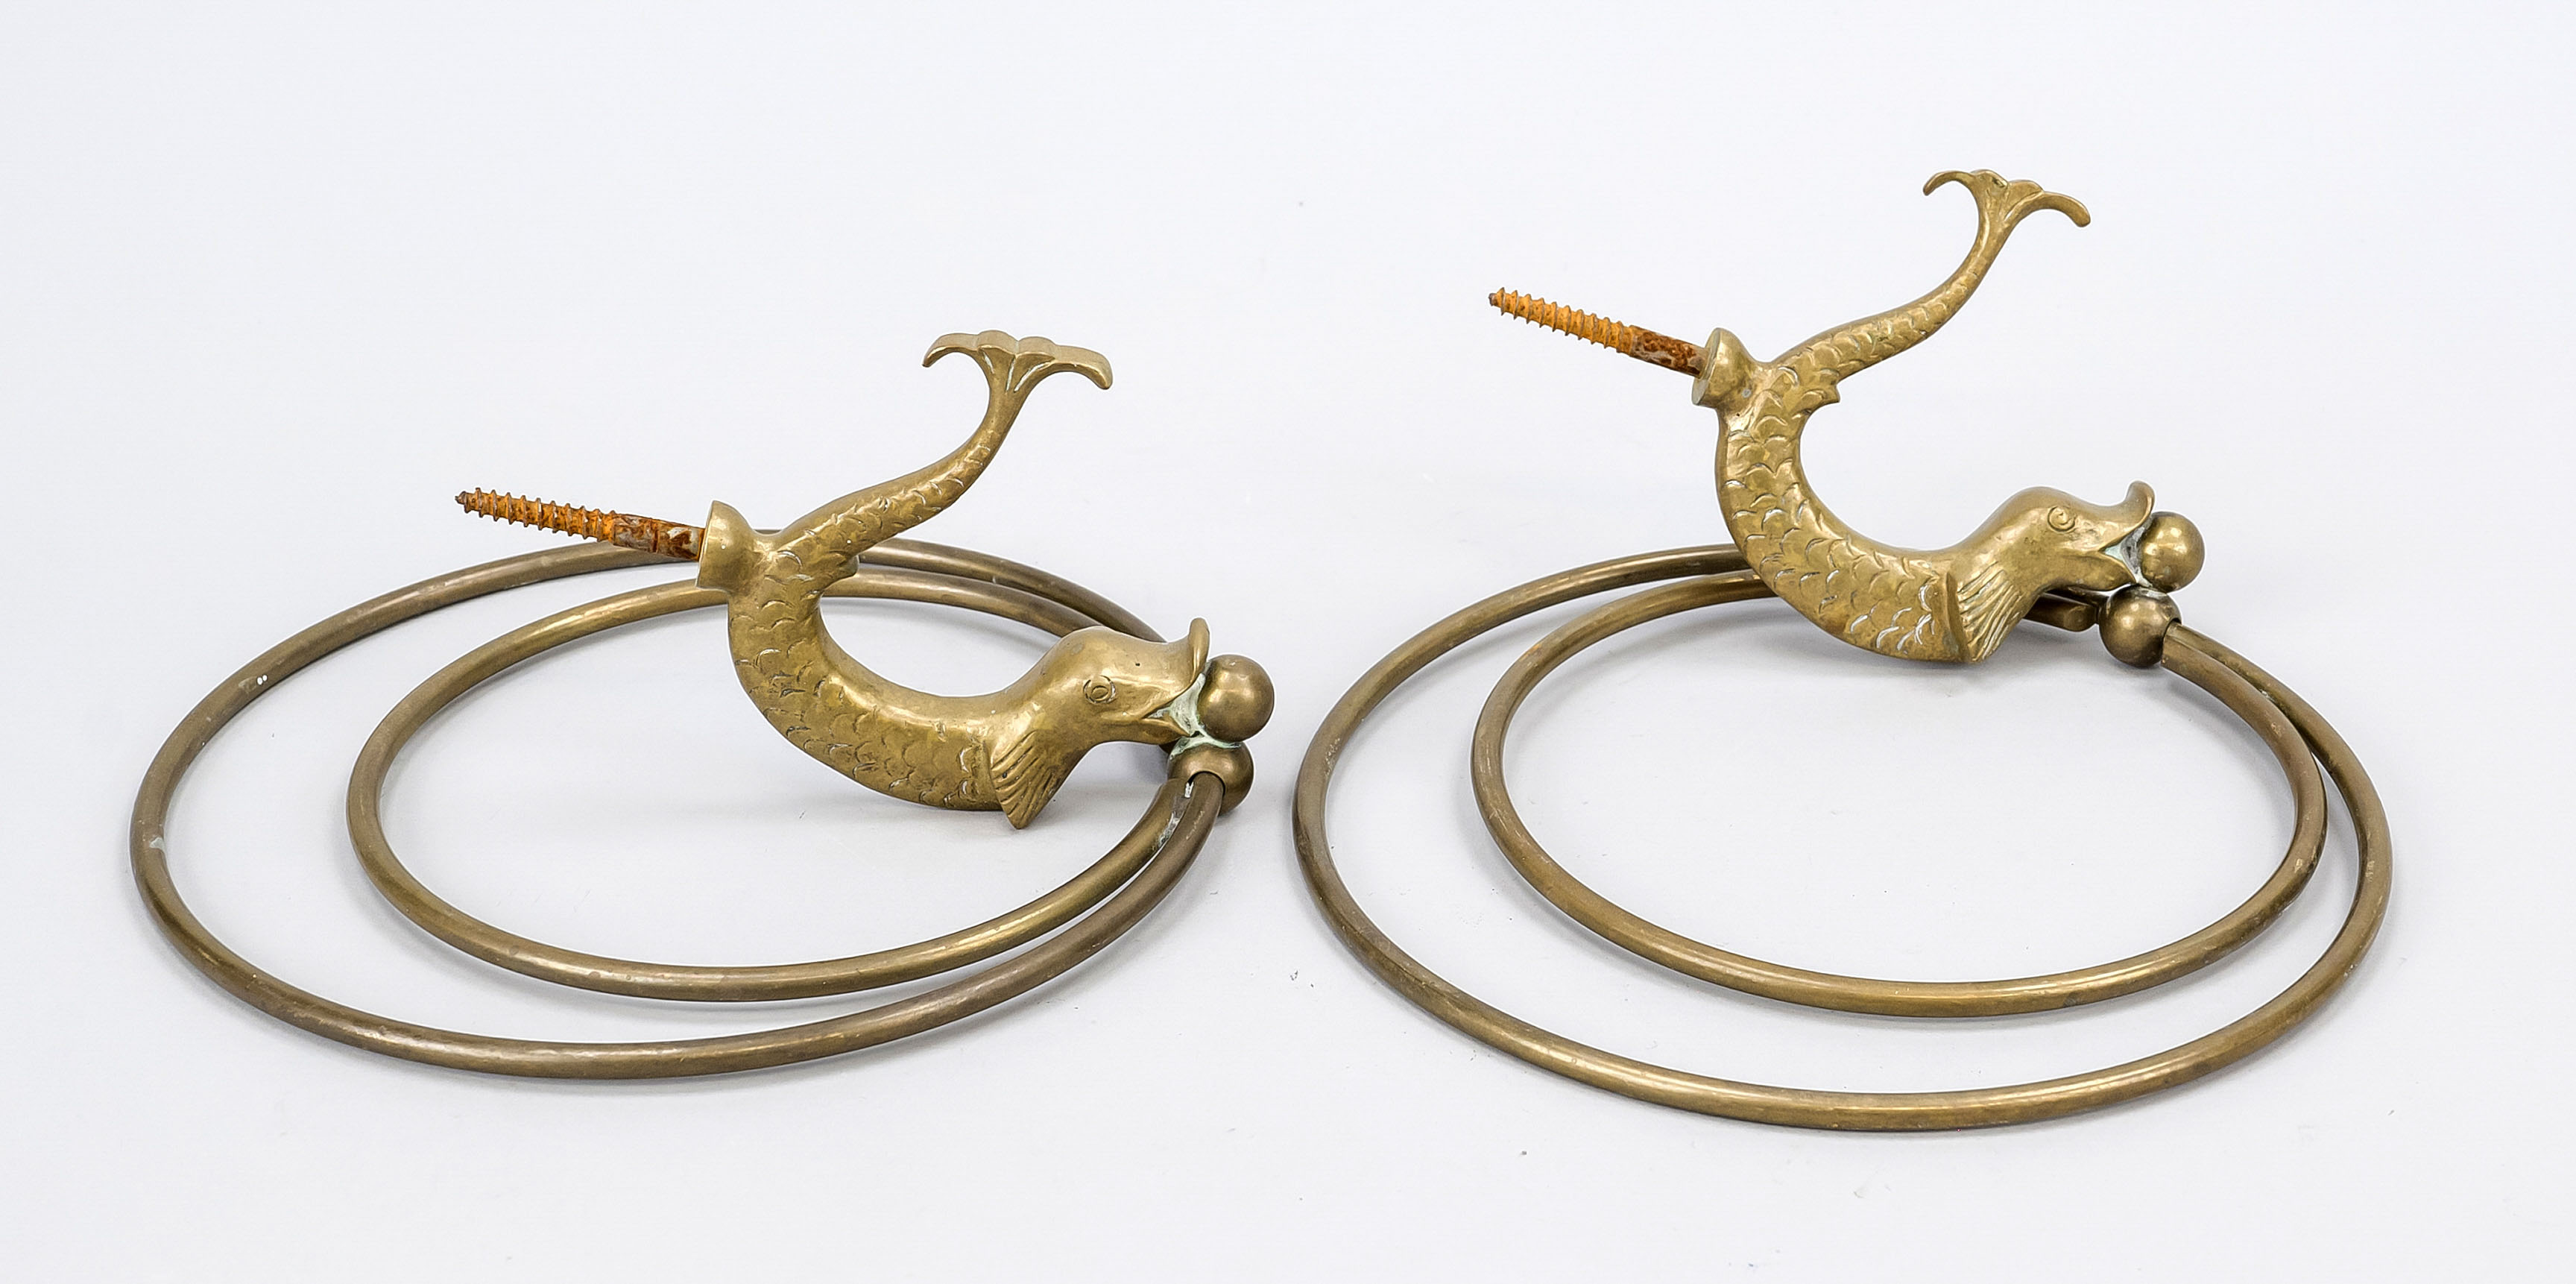 Pair of towel rails in the shape of dolphins, around 1900, brass. Two dolphins with screw